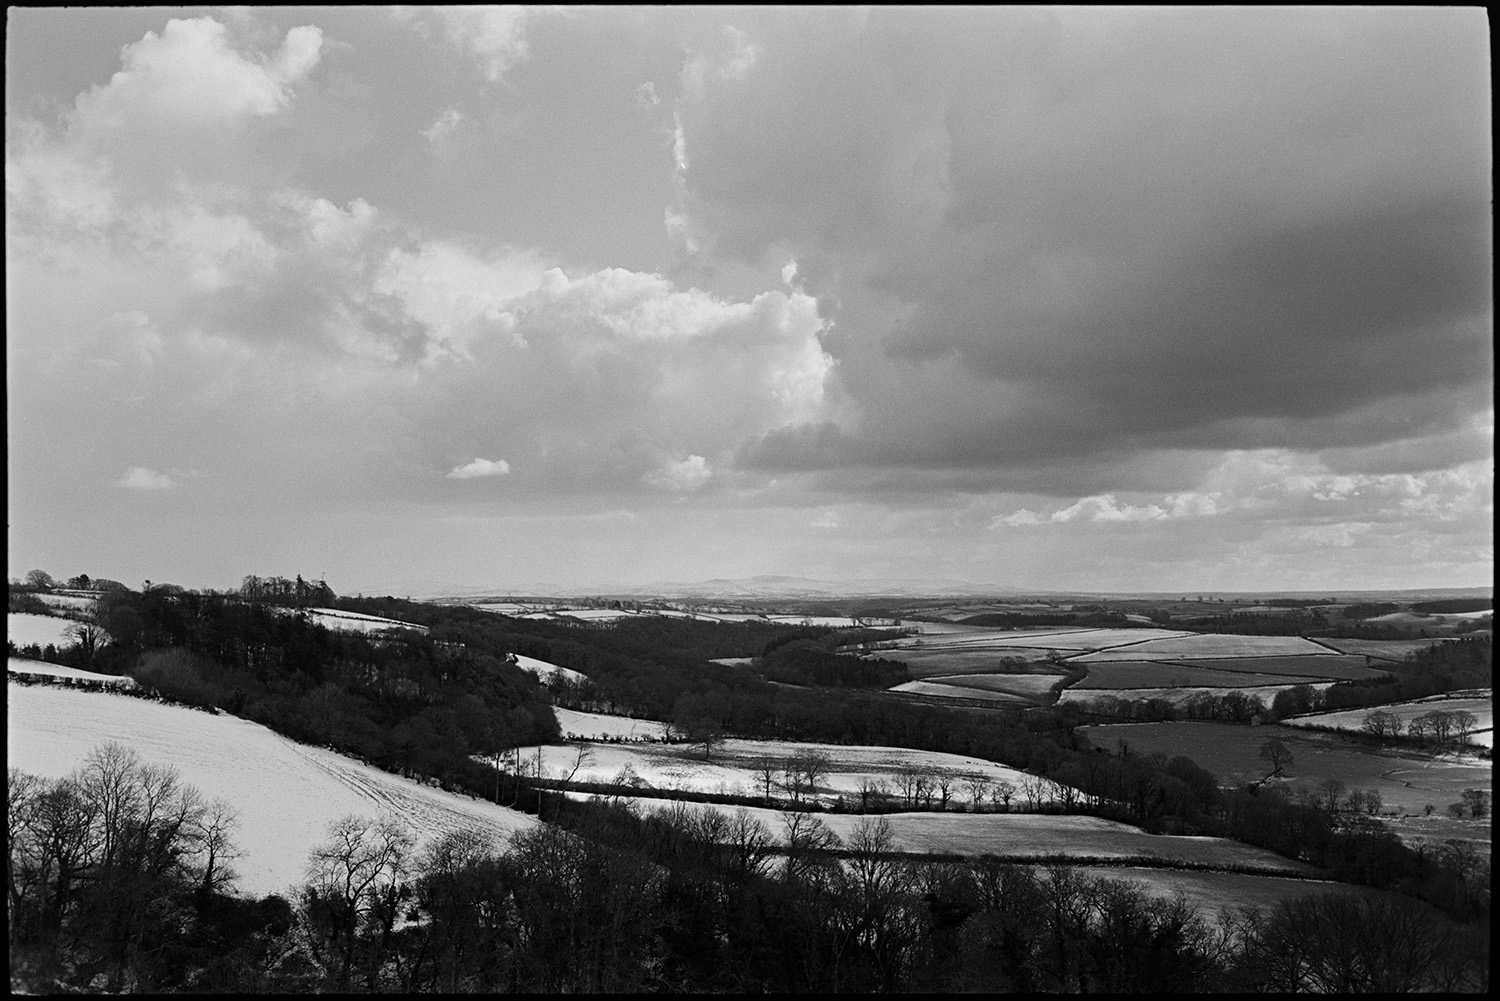 Snow, cloudy landscape with distant moor. 
[A landscape with snow covered fields, trees and hedgerows at Harepath, Beaford. Clouds are visible in the sky above.]